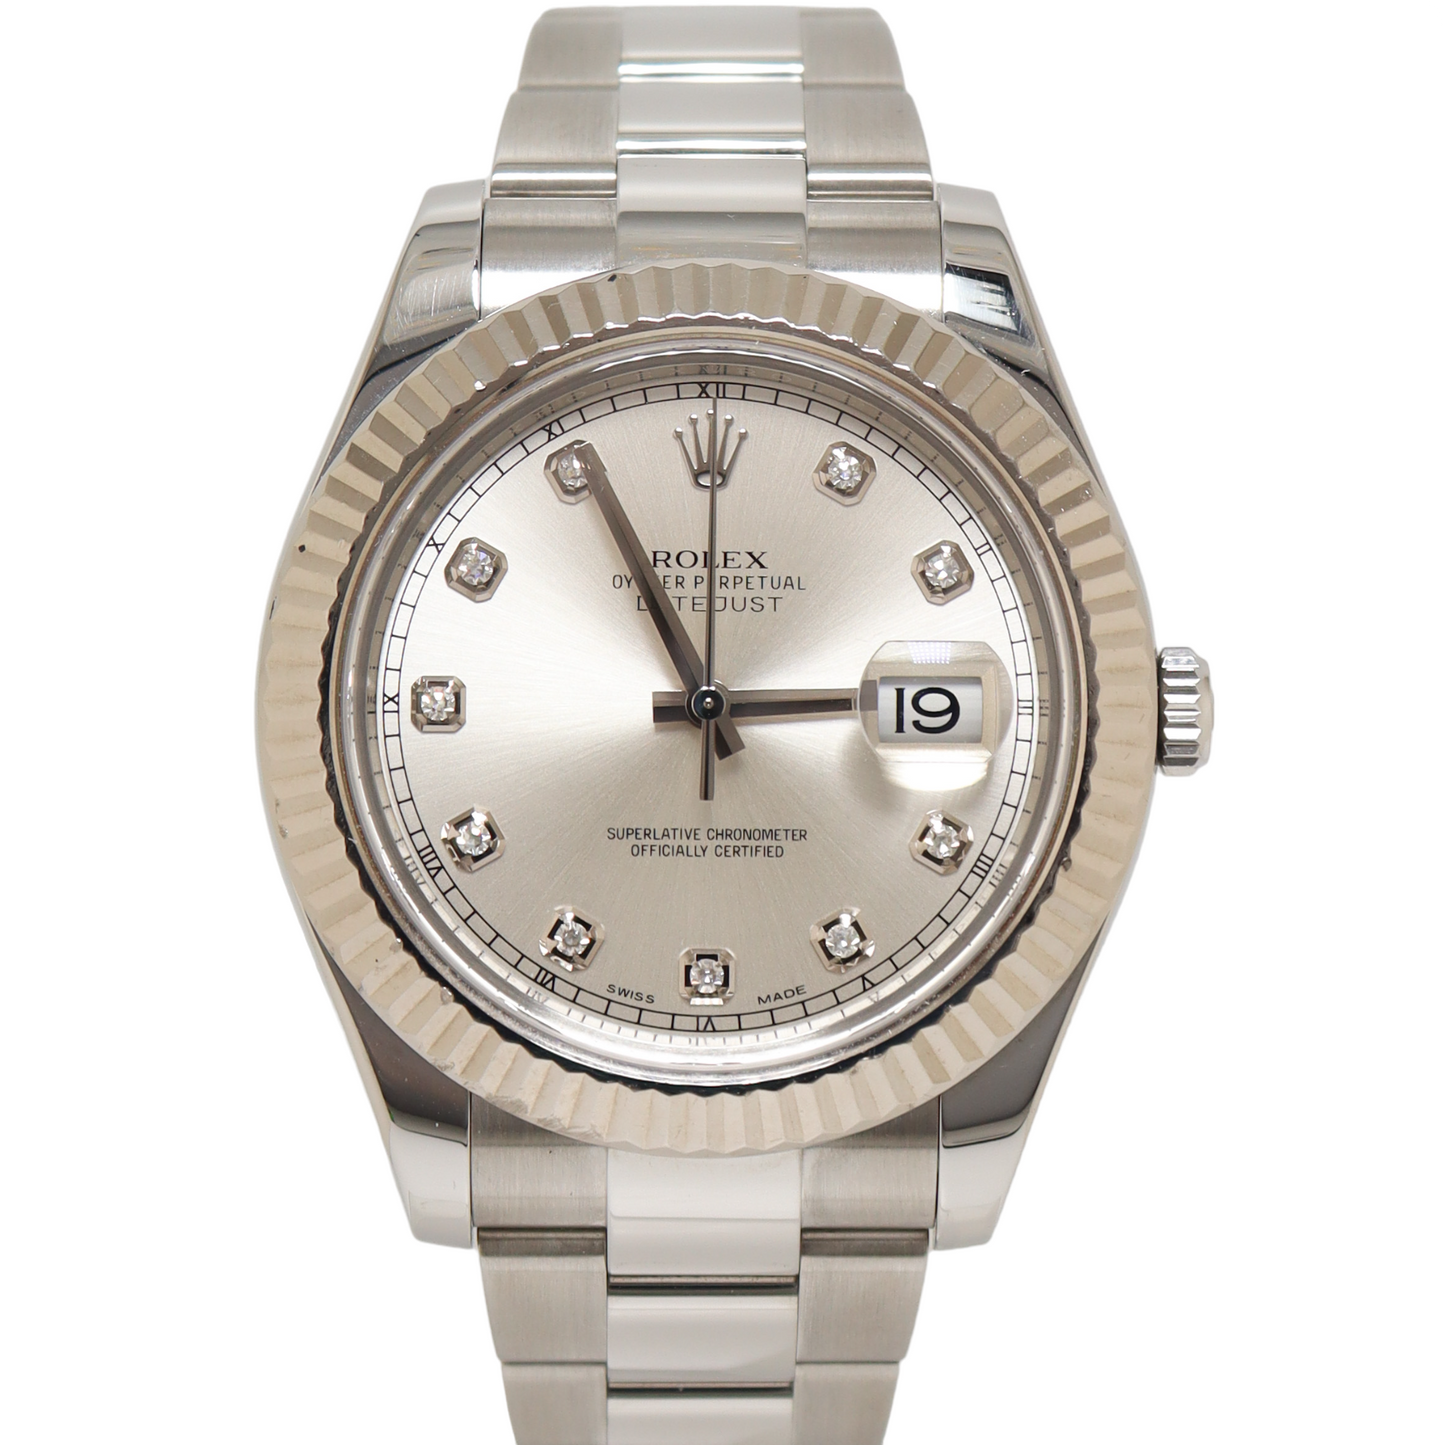 Rolex Datejust Stainless Steel 41mm Silver Diamond Dial Watch Reference #: 116334